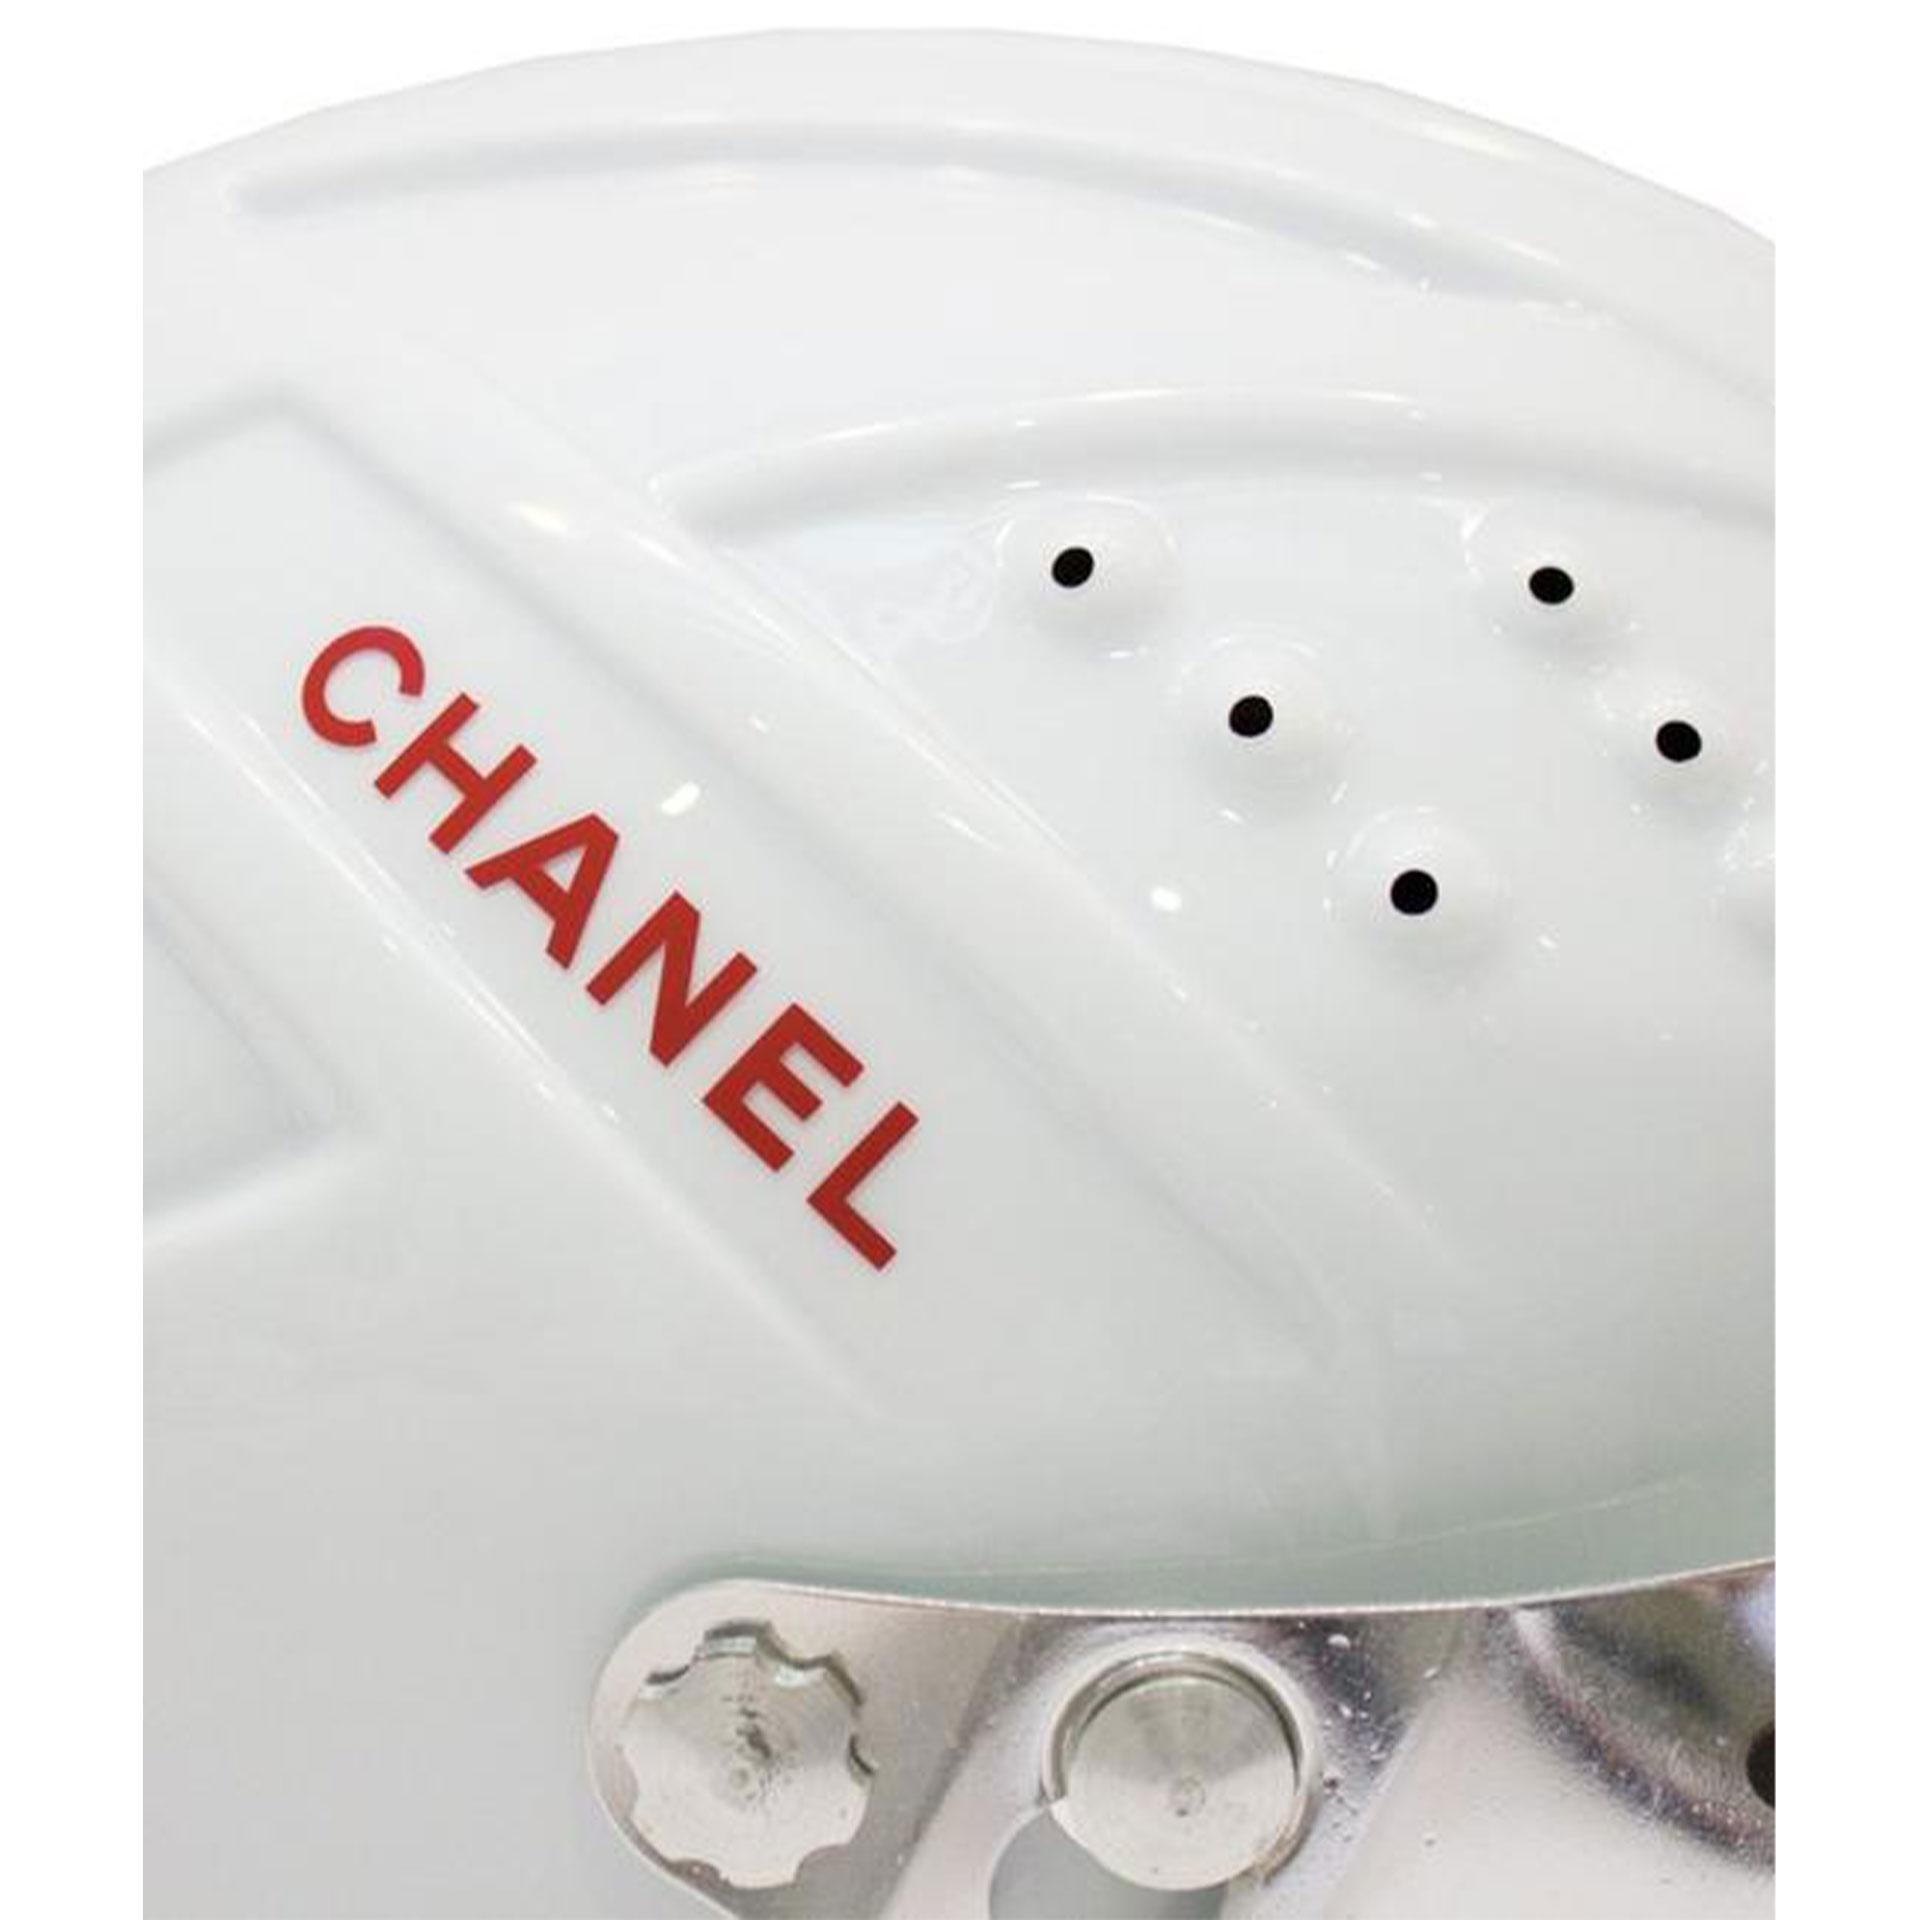 Chanel 2001 White Logo Vintage Mountaineer Helmet Limited Edition Novelty Hat In Good Condition For Sale In Miami, FL